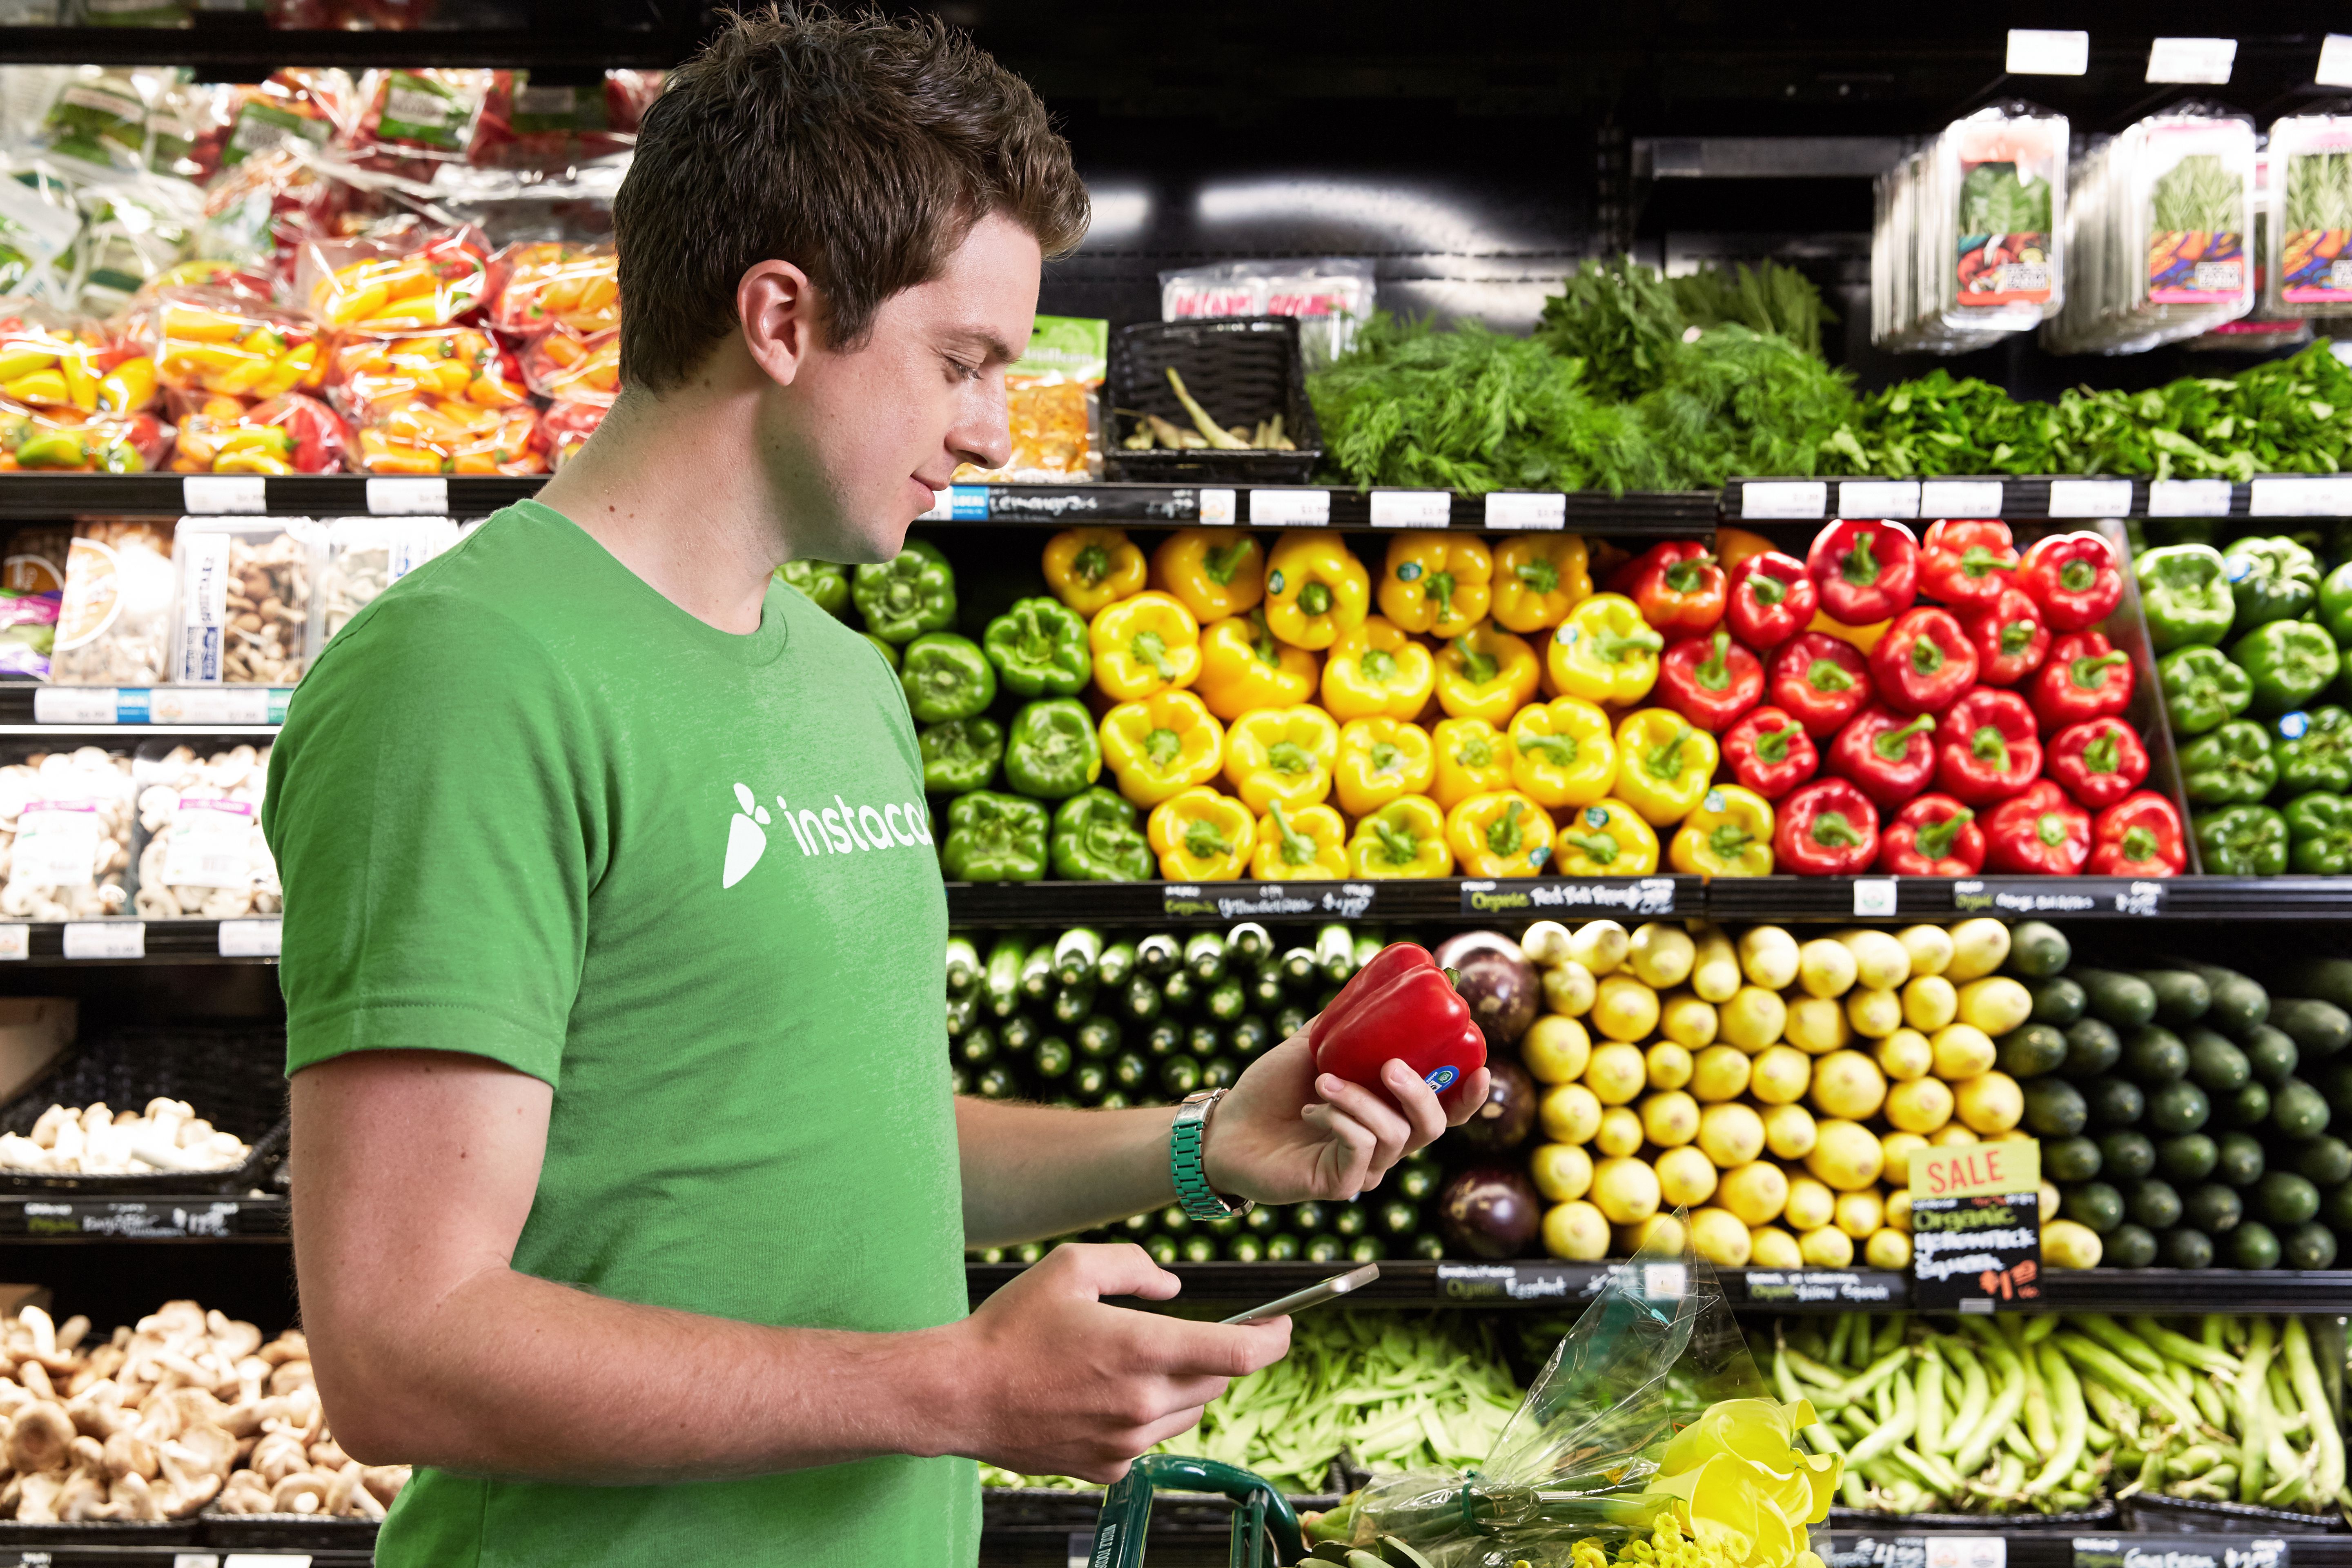 The options keep growing. Who does grocery delivery best,  Prime Now,  Instacart, Walmart or Shipt?